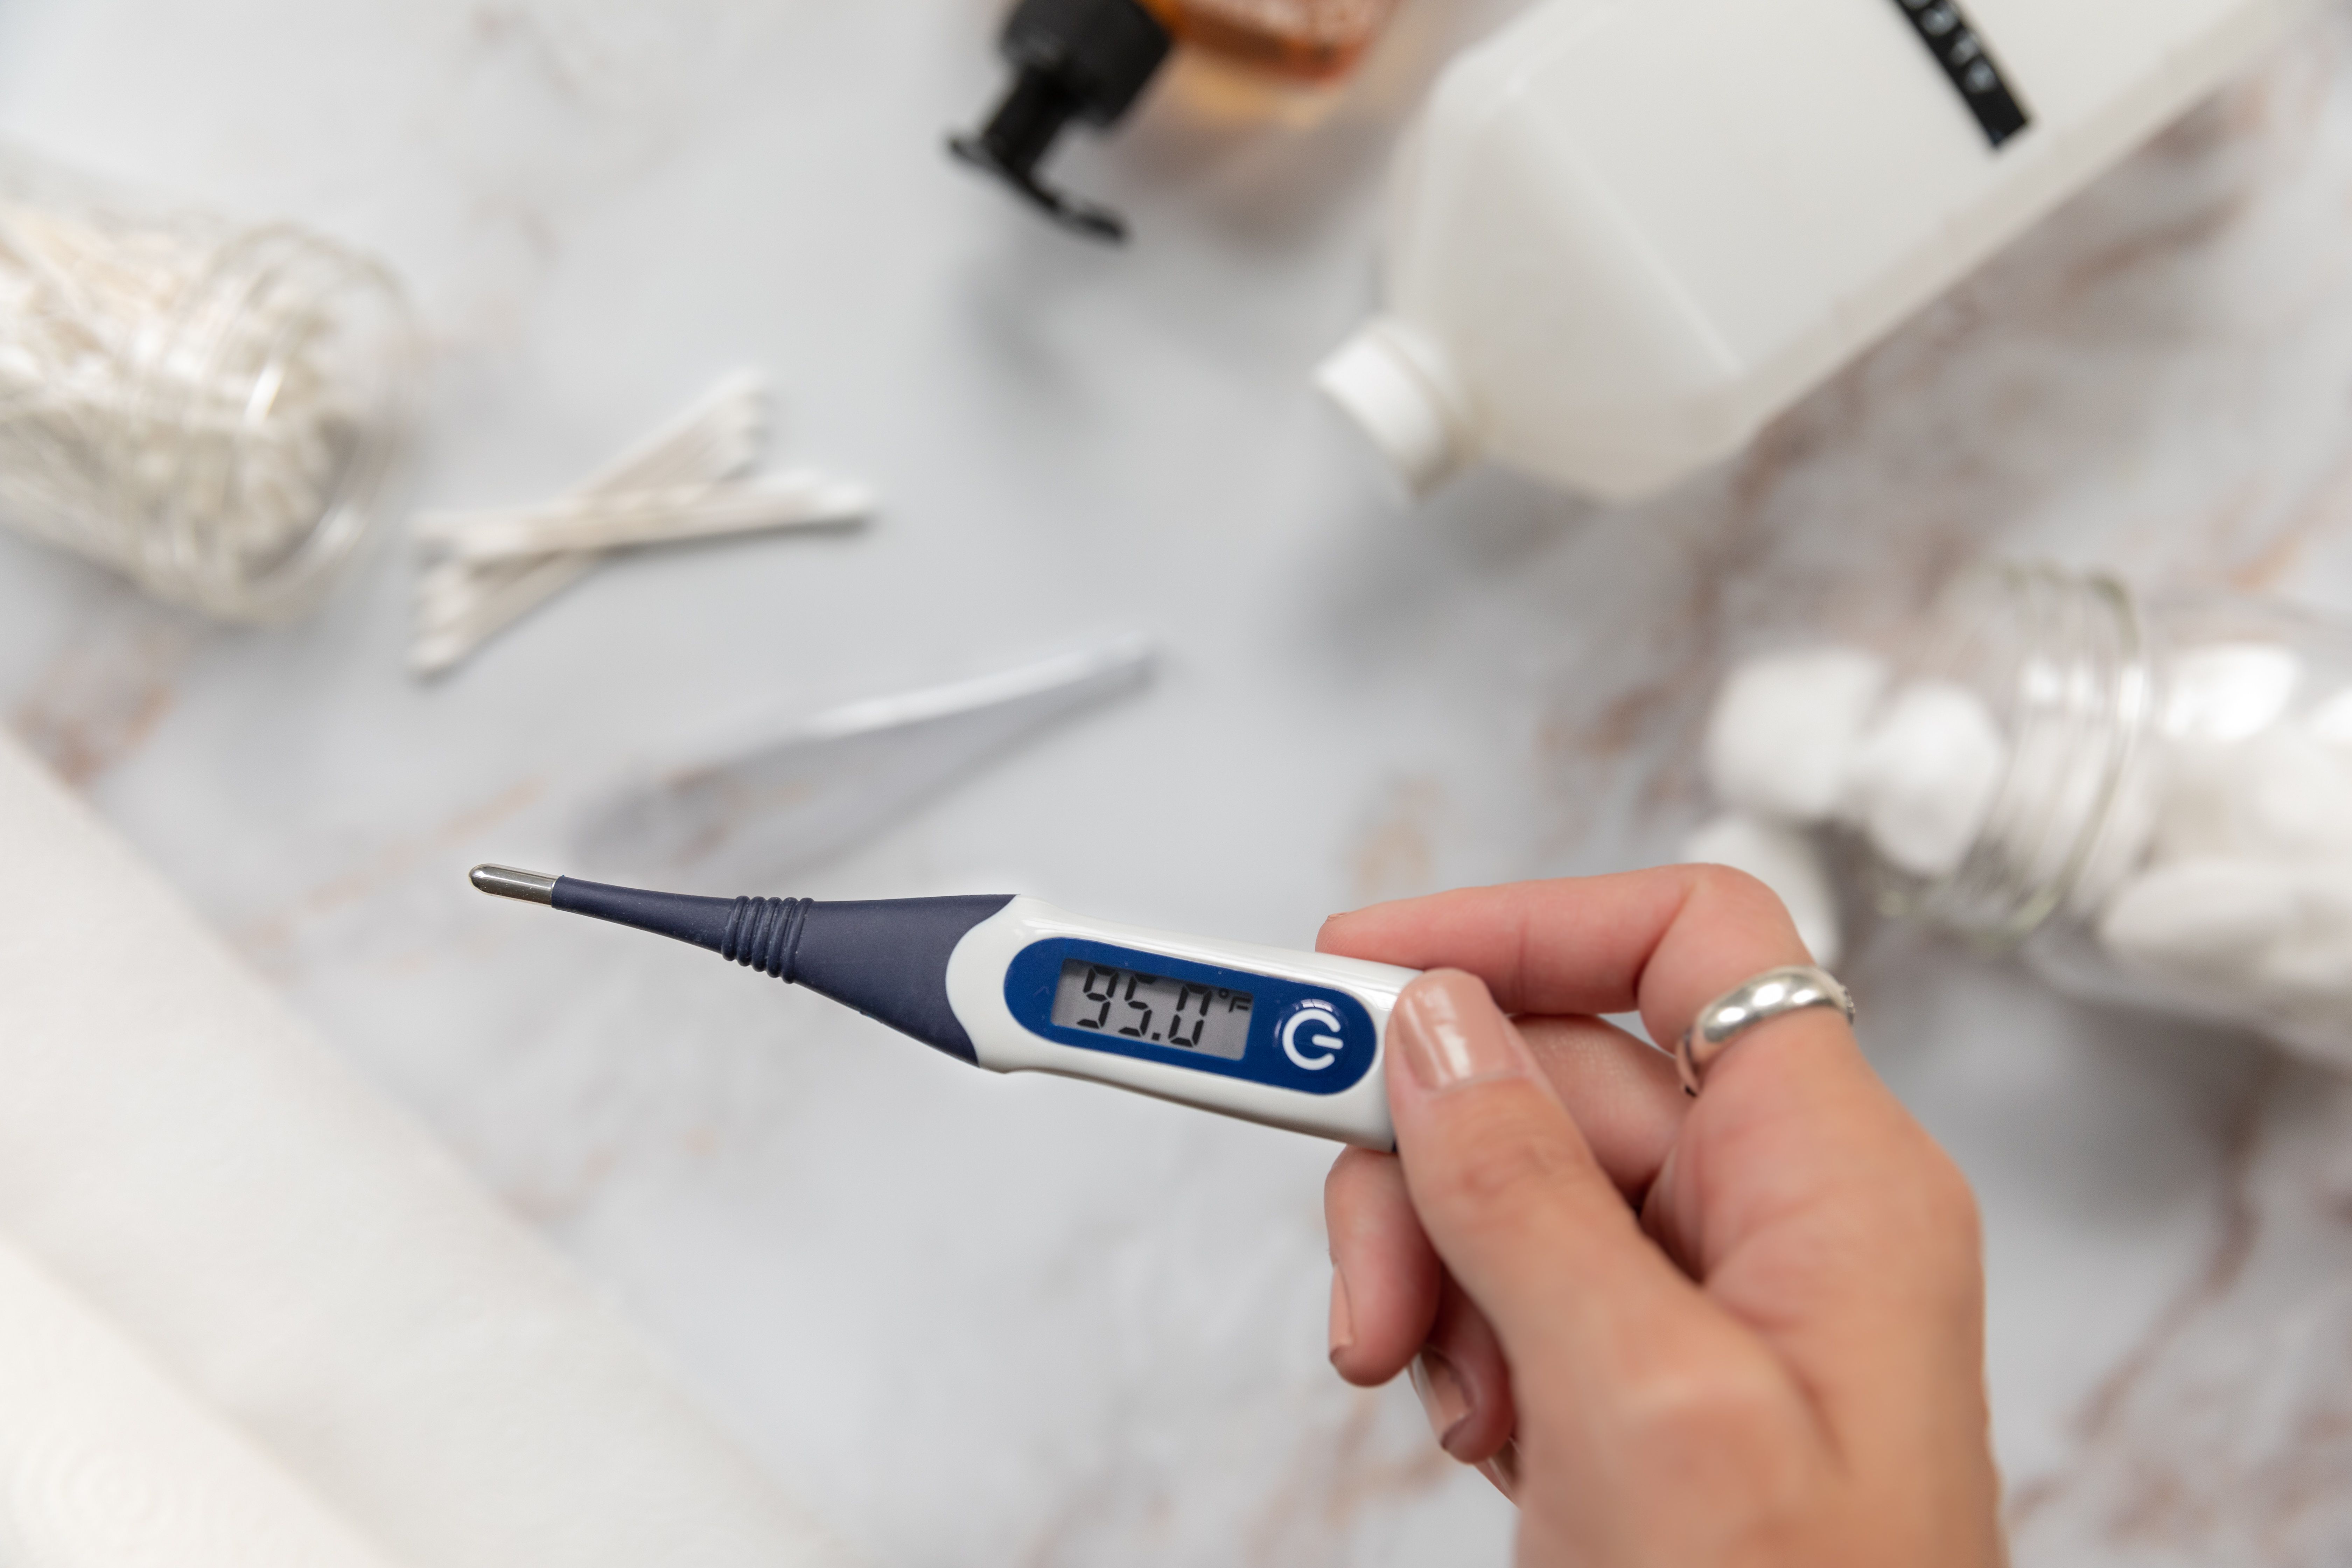 How to Properly Disinfect a Thermometer